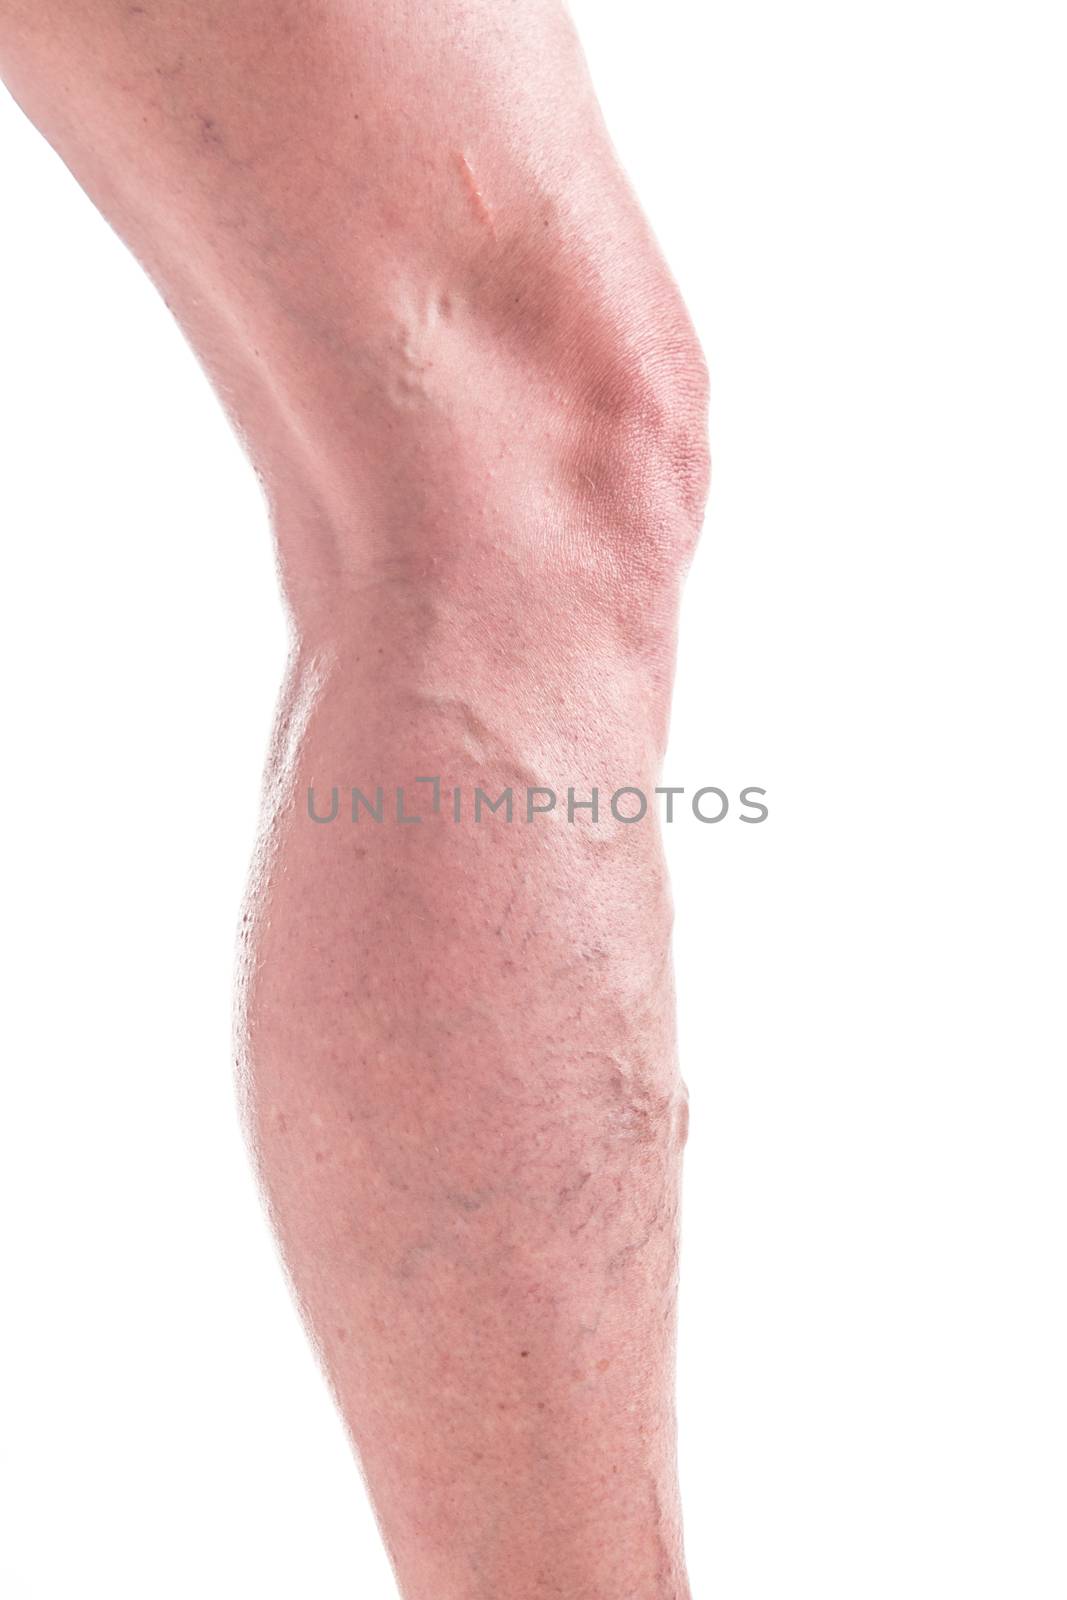 Varicose Veins on the legs of woman by MichalLudwiczak